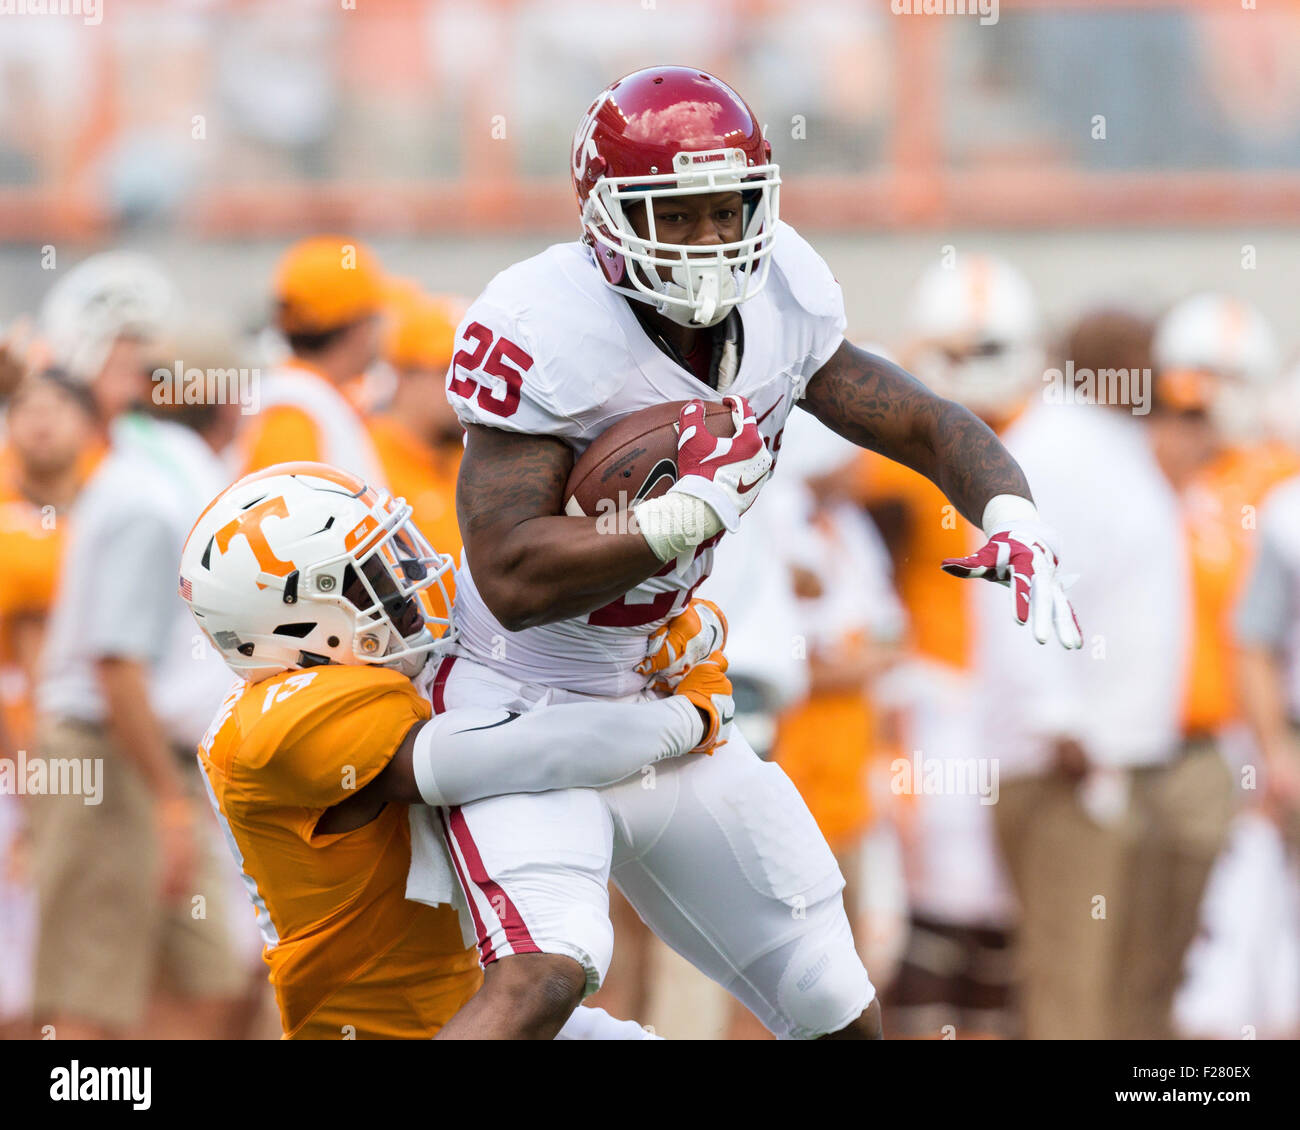 September 12, 2015: Joe Mixon #25 of the Oklahoma Sooners runs the ball  while Malik Foreman #13 of the Tennessee Volunteers tries to tackle him  during the NCAA Football game between the University of Tennessee  Volunteers and the Oklahoma ...